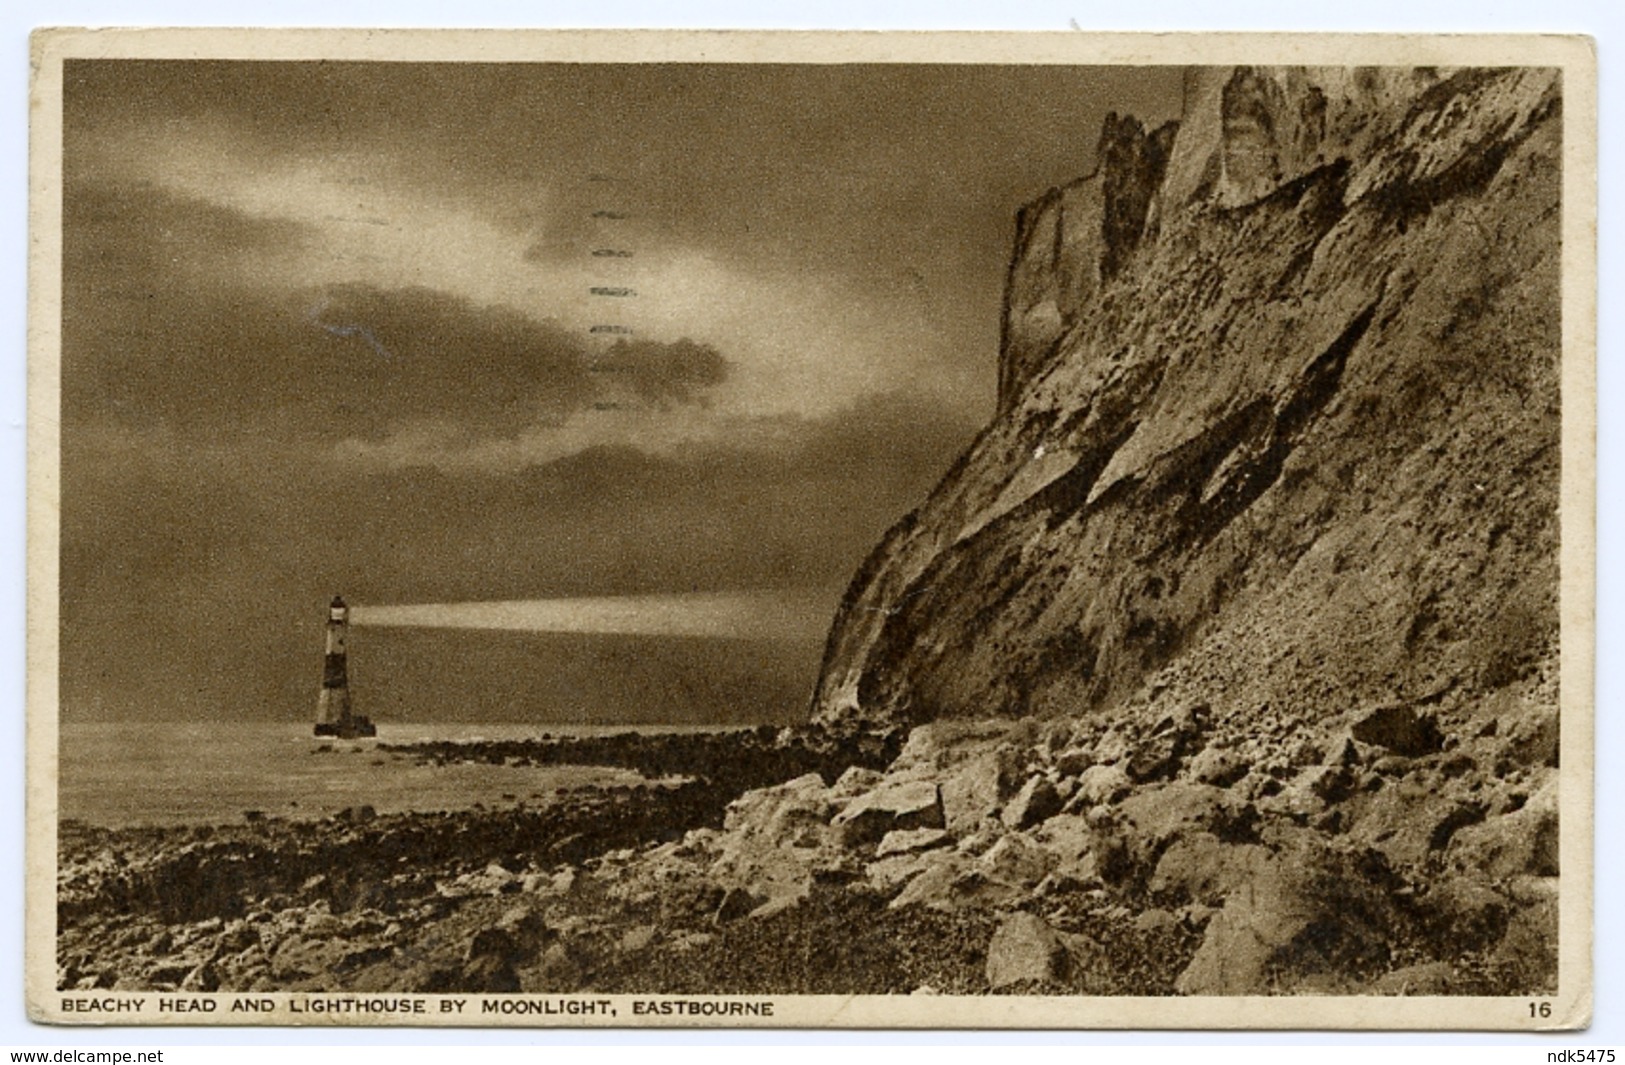 EASTBOURNE : BEACHY HEAD AND LIGHTHOUSE BY MOONLIGHT / ADDRESS - LONDON, VESPAN ROAD (MORRIS) - Lighthouses